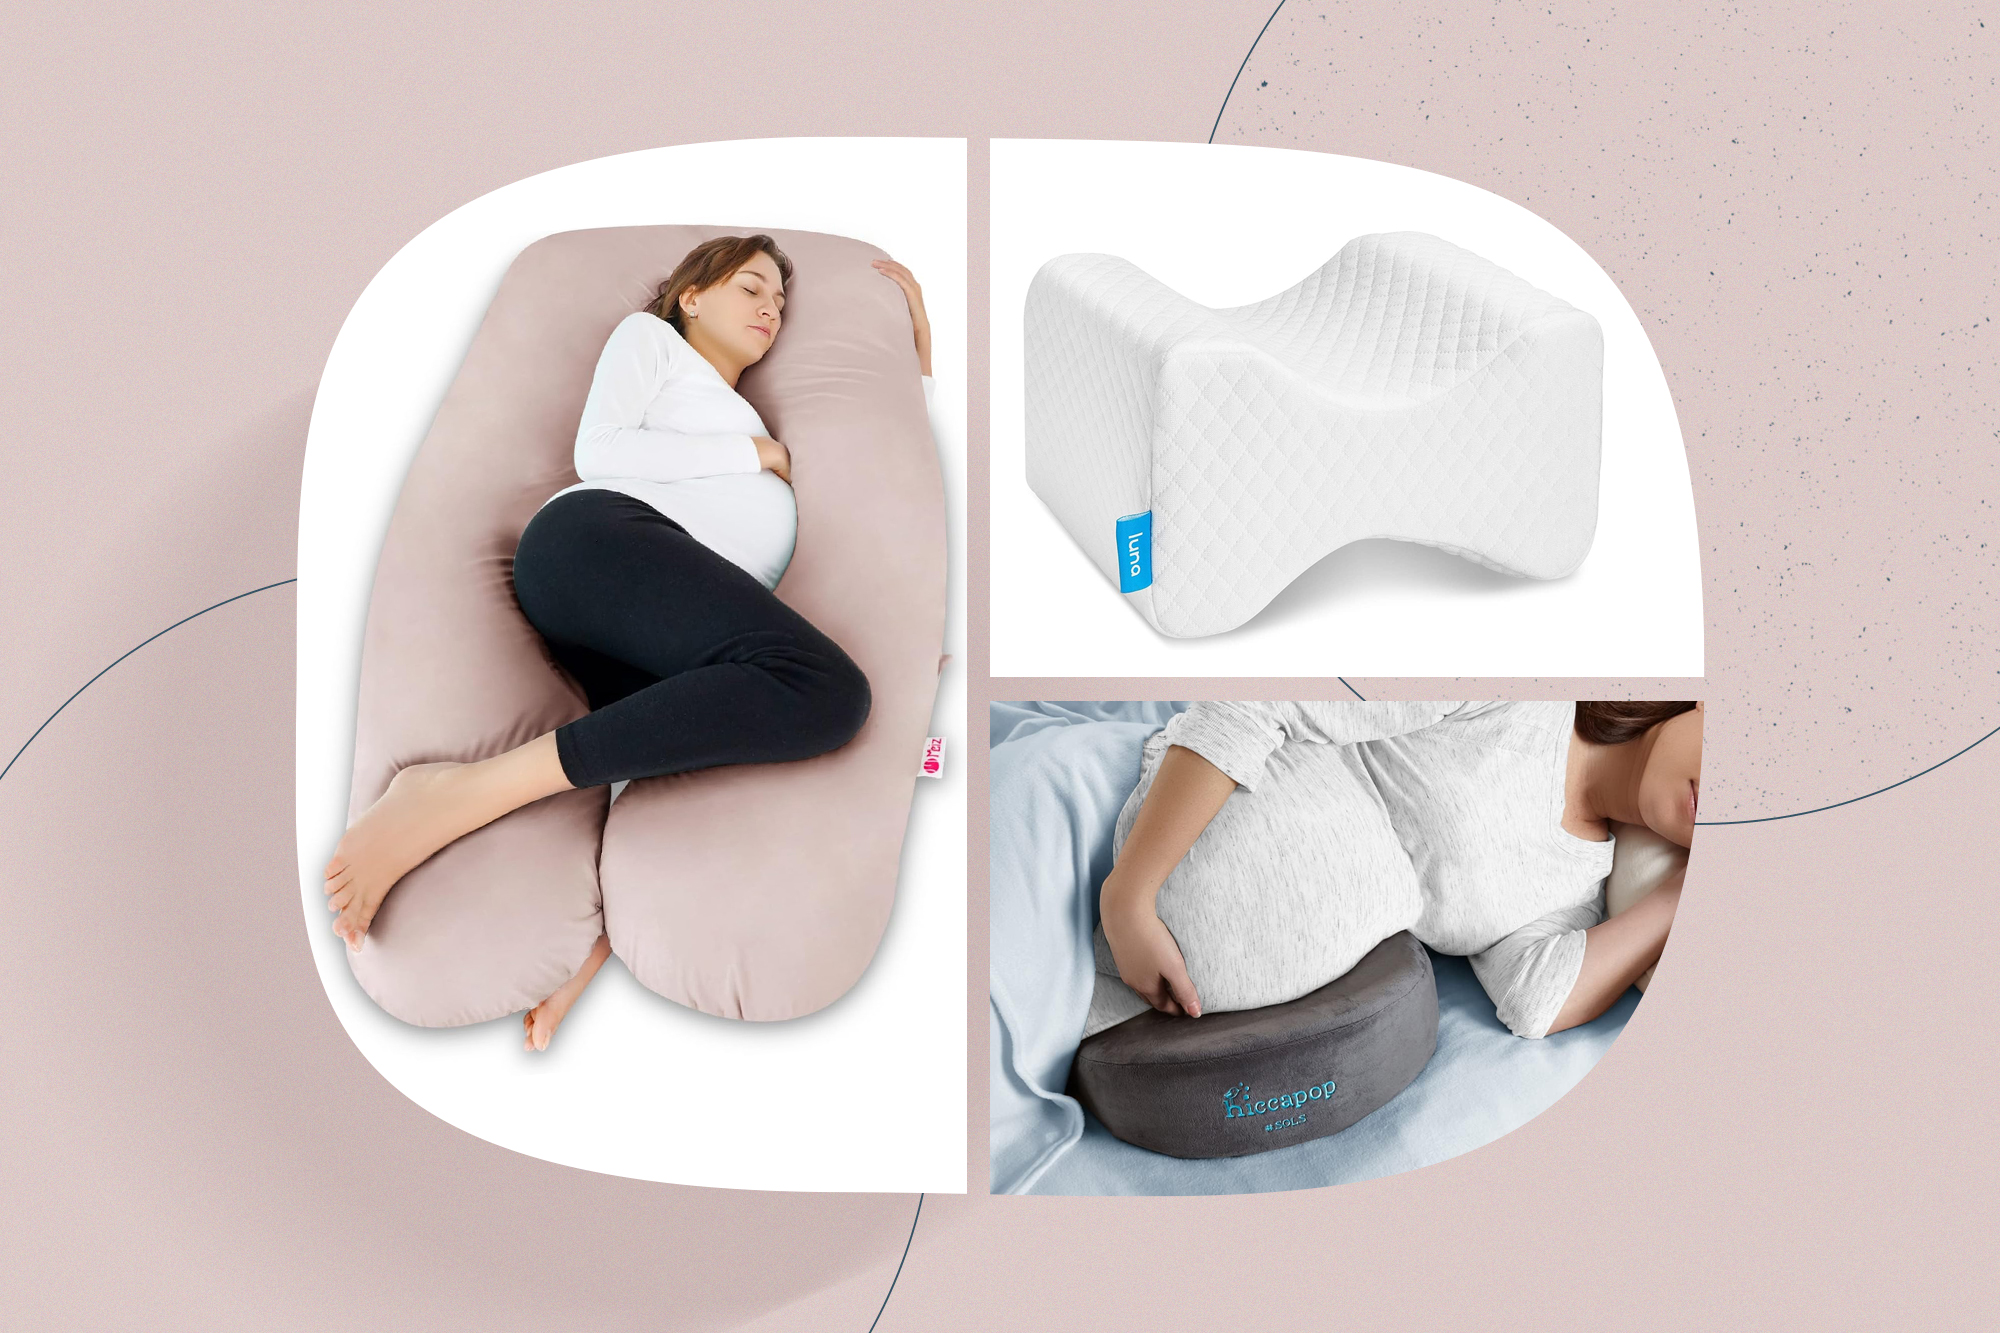 8 Best Lumbar Support Pillows to Help Back Pain in 2023